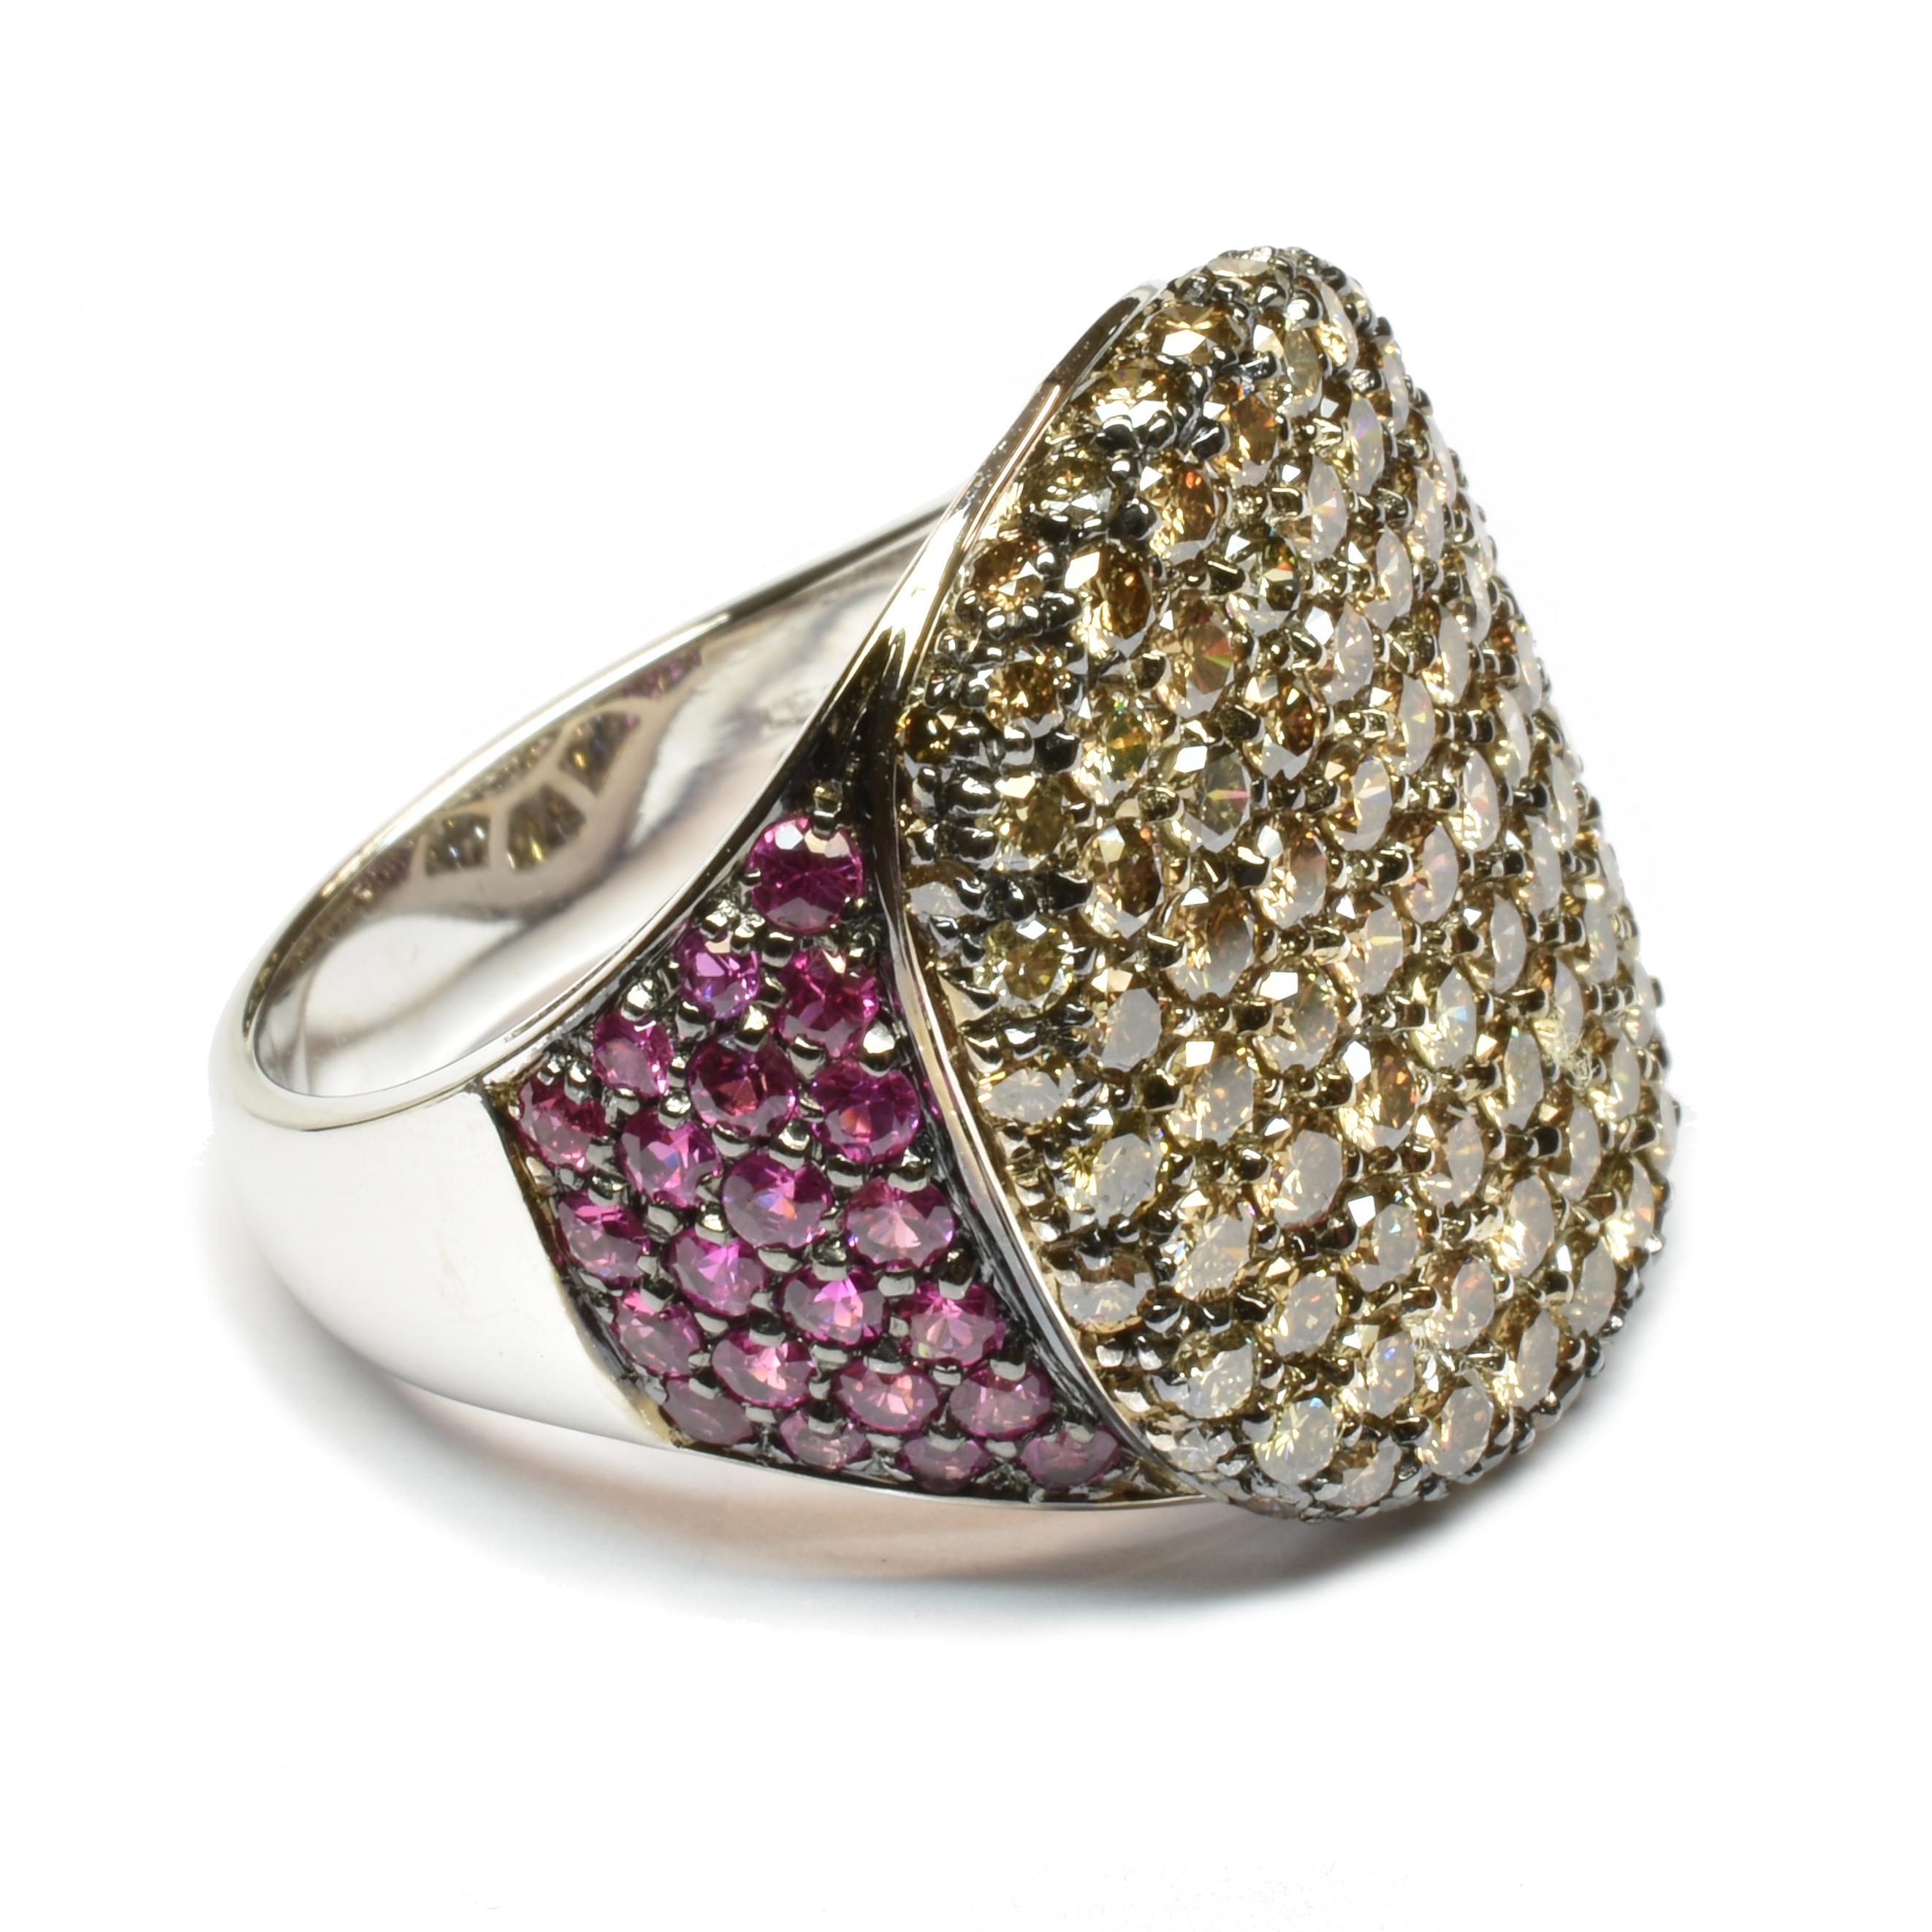 Gilberto Cassola 18Kt White Gold Ring with Champagne Diamonds and Bright Pink Rubies set on Black Rhodium Plated 18Kt Gold.
Handmade in our Atelier in Valenza AL.
A Classy and Elegant timeless Ring either for everyday use or for a special